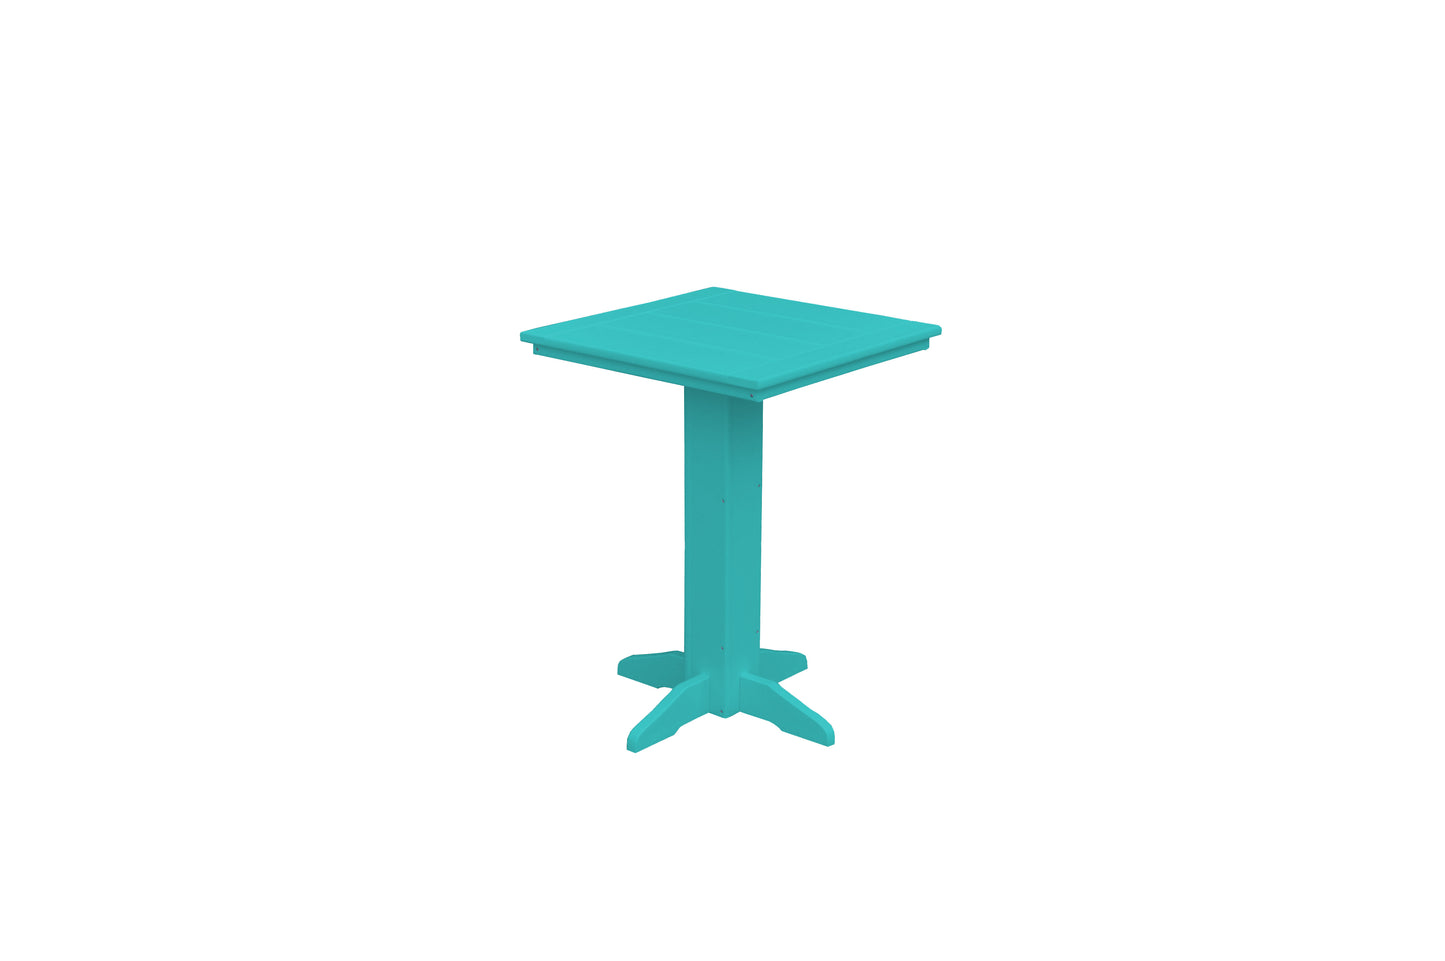 A&L Furniture Co. Recycled Plastic Square Bistro Table - LEAD TIME TO SHIP 10 BUSINESS DAYS